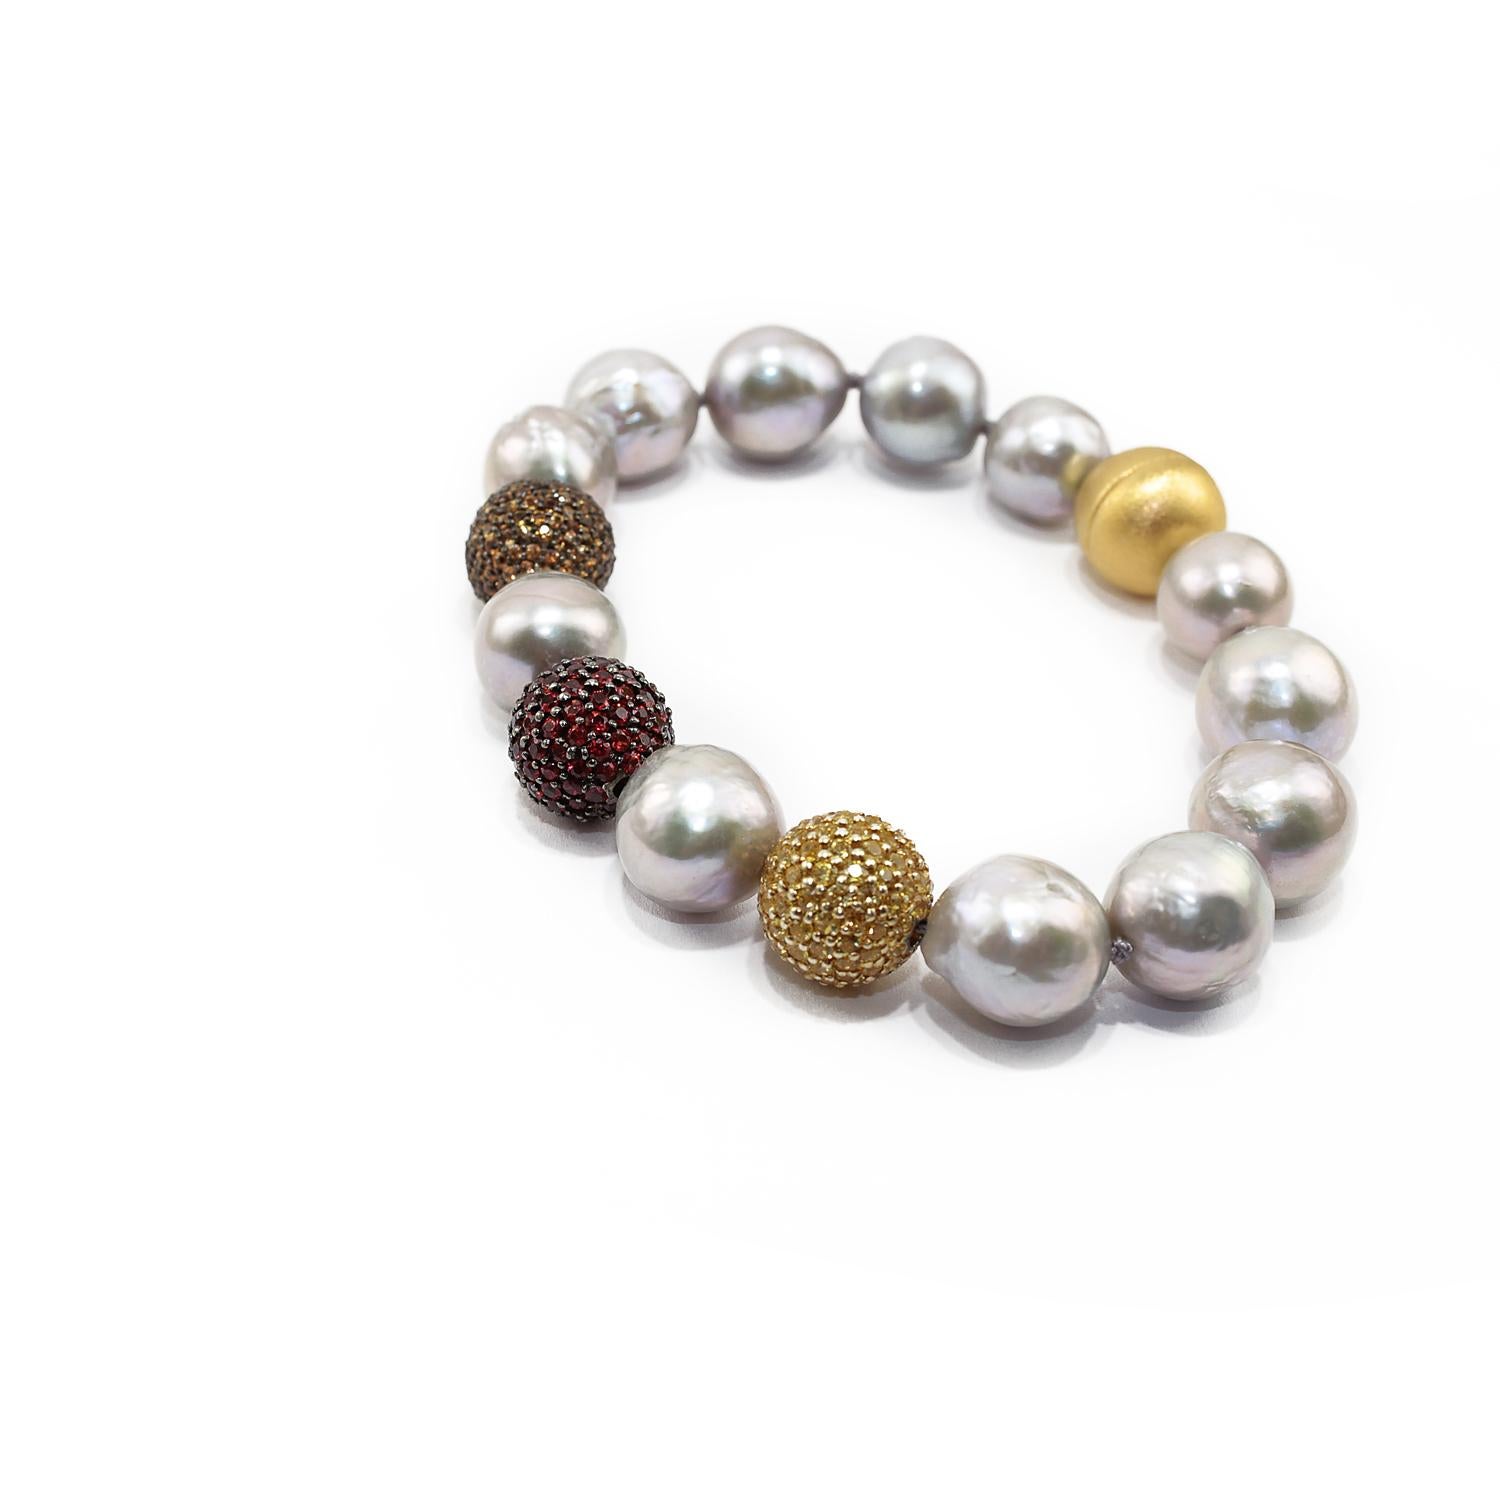 Nice bracelet made up of light and dark orange sapphires and yellow sapphires pave on silver setting, baroque grey pearls and 925 satin silver clasp. 
Sapphires pave ct. 1,79 each 
Yellow sapphires ct. 1,79
Baroque grey pearls
925 satin yellow